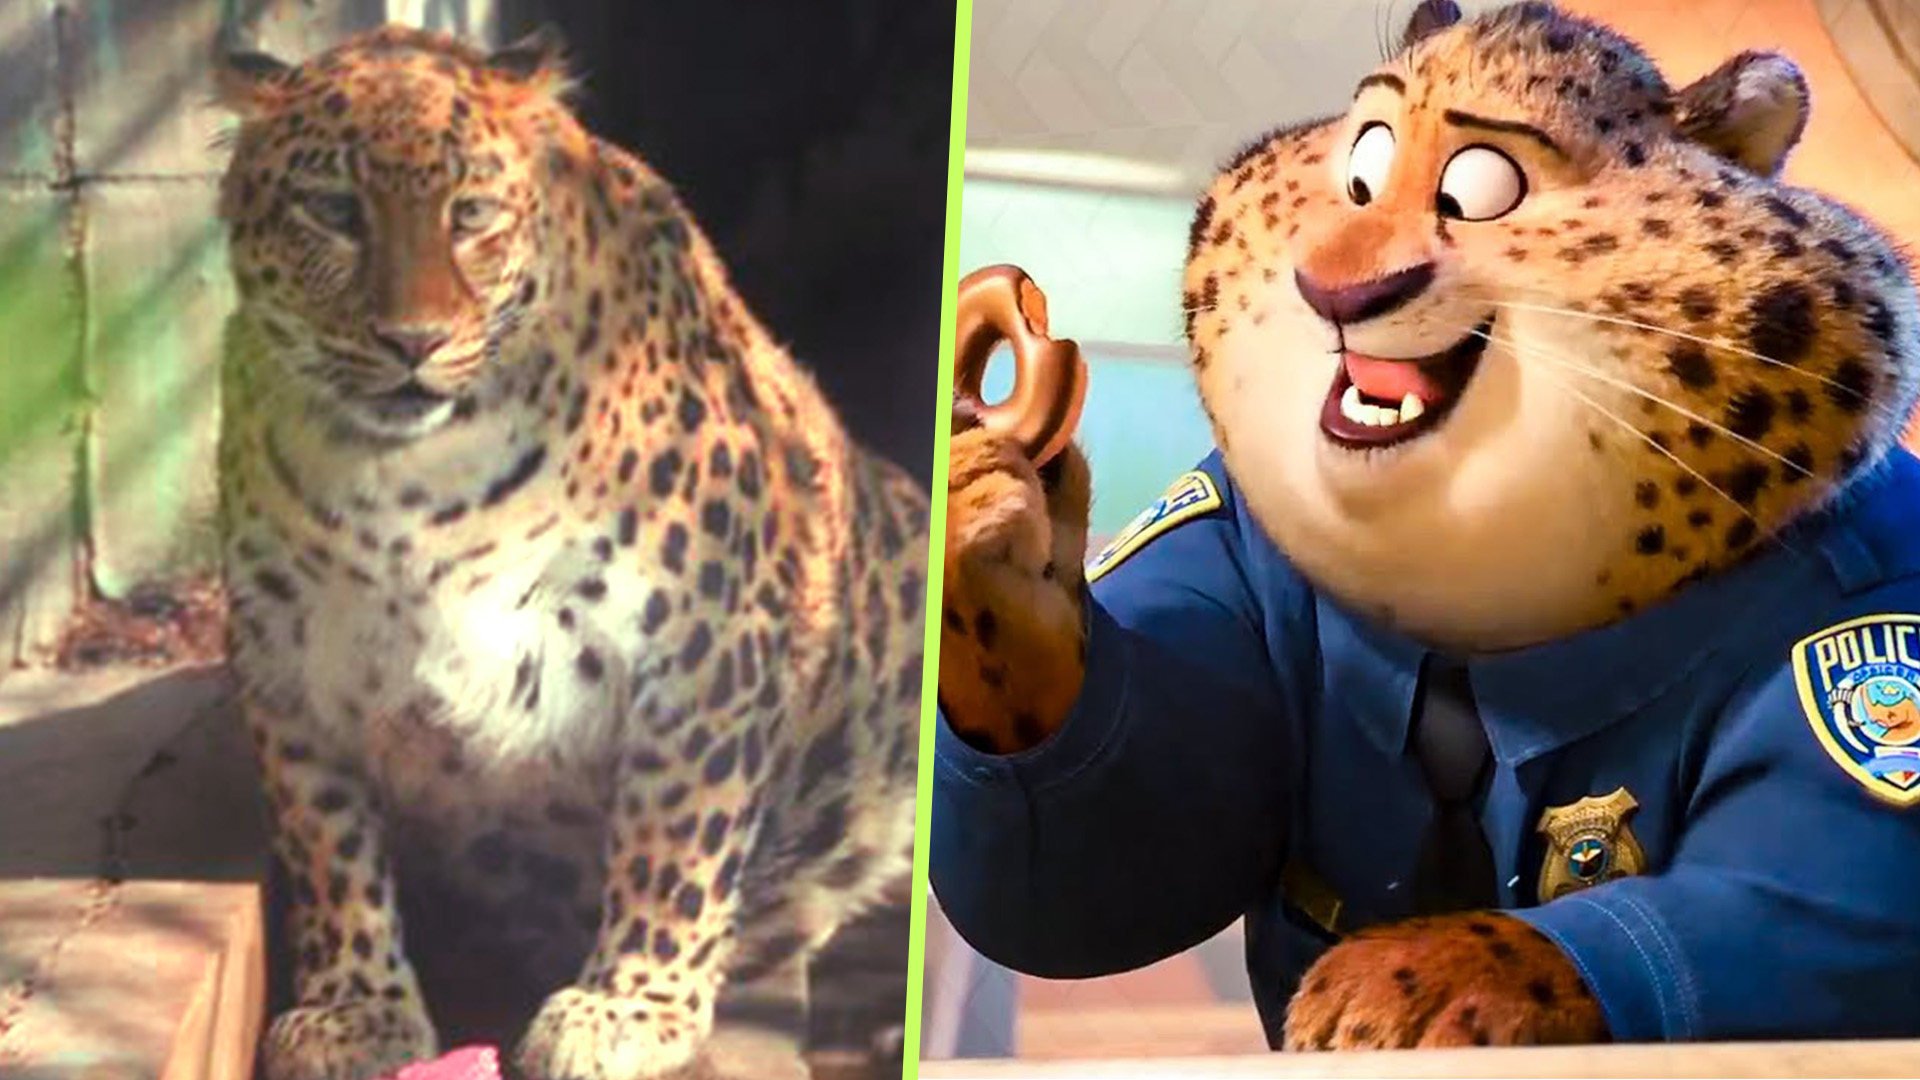 A big leopard at a zoo in China’s Sichuan province resembles Disney’s animated character, Officer Clawhauser. Photo: SCMP composite/Sina.com/YouTube